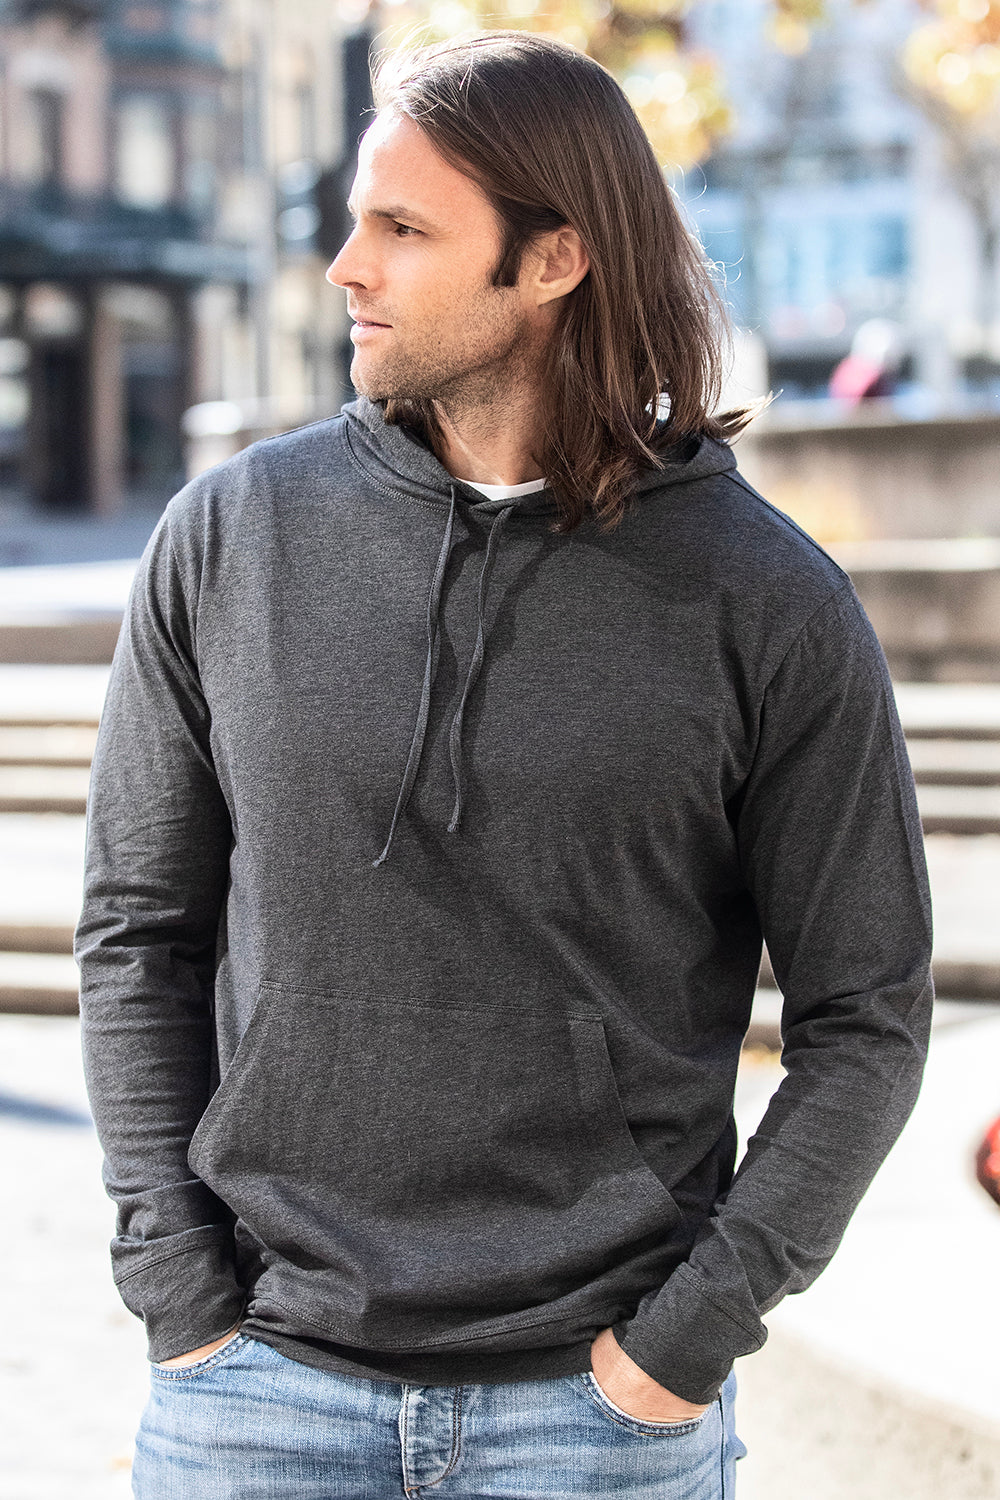 unisex organic all cotton long sleeve hoodie- dark charcoal heather grey - fair trade ethically made